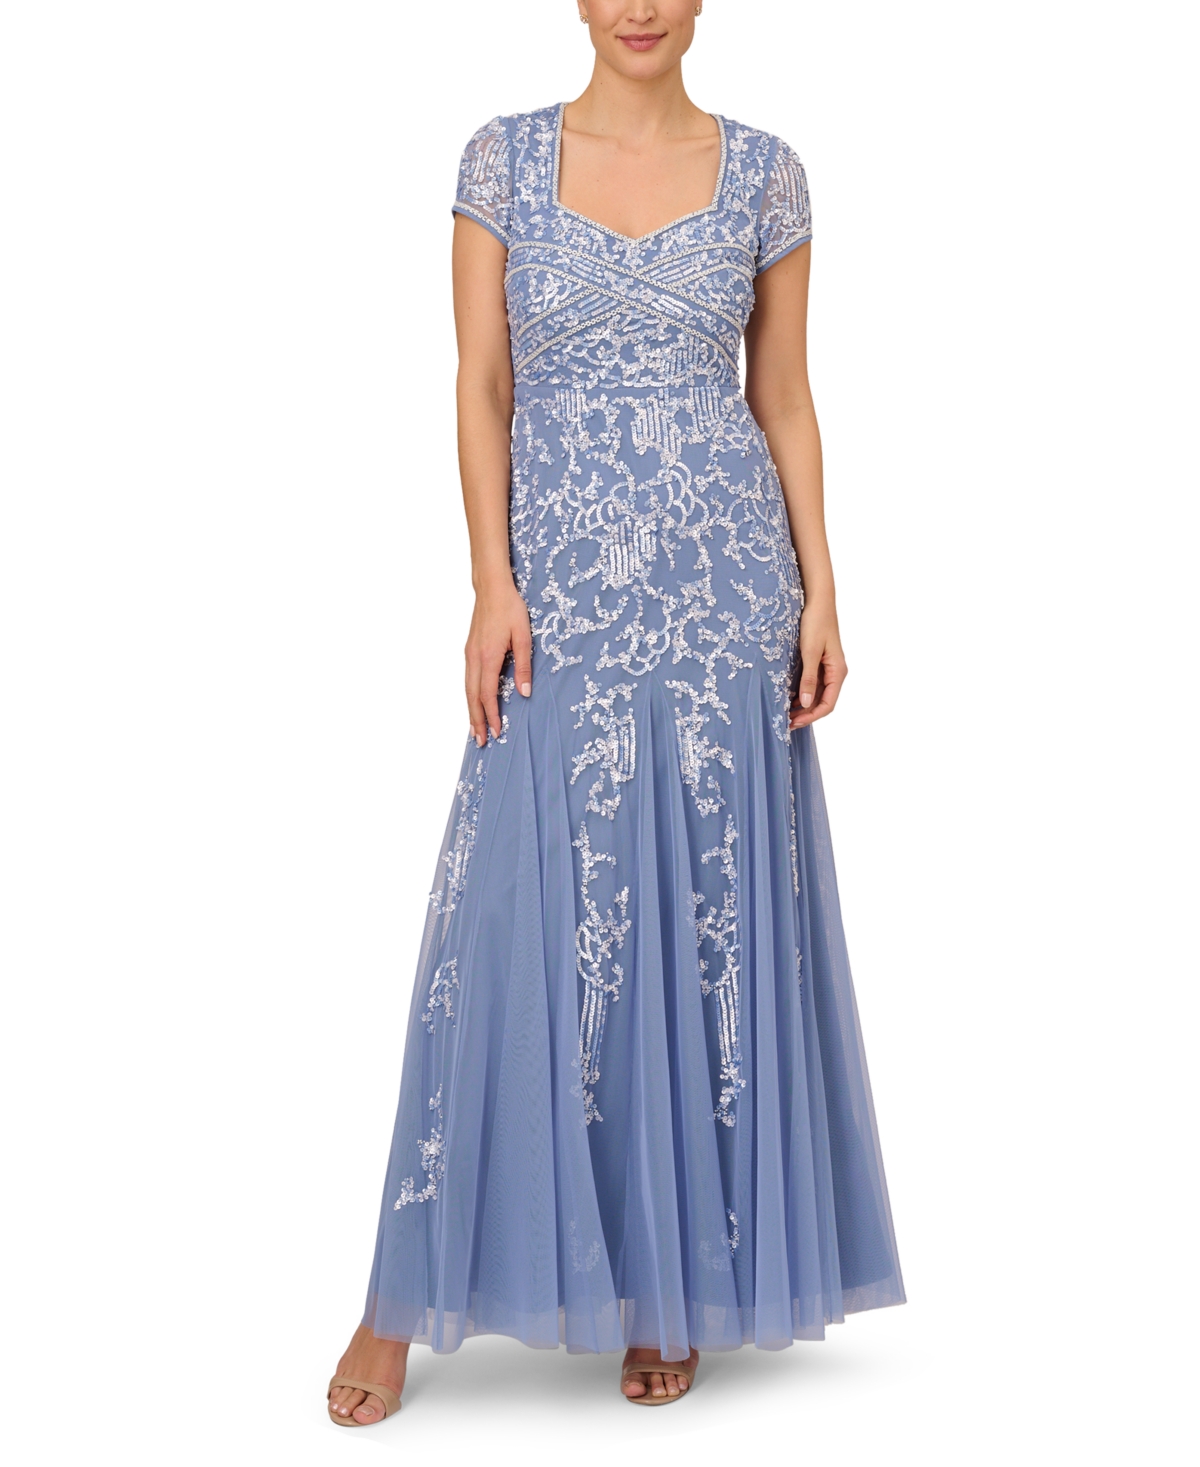 1940s Evening, Prom, Party, Formal, Ball Gowns Adrianna Papell Embellished Godet Gown - French Blue $349.00 AT vintagedancer.com